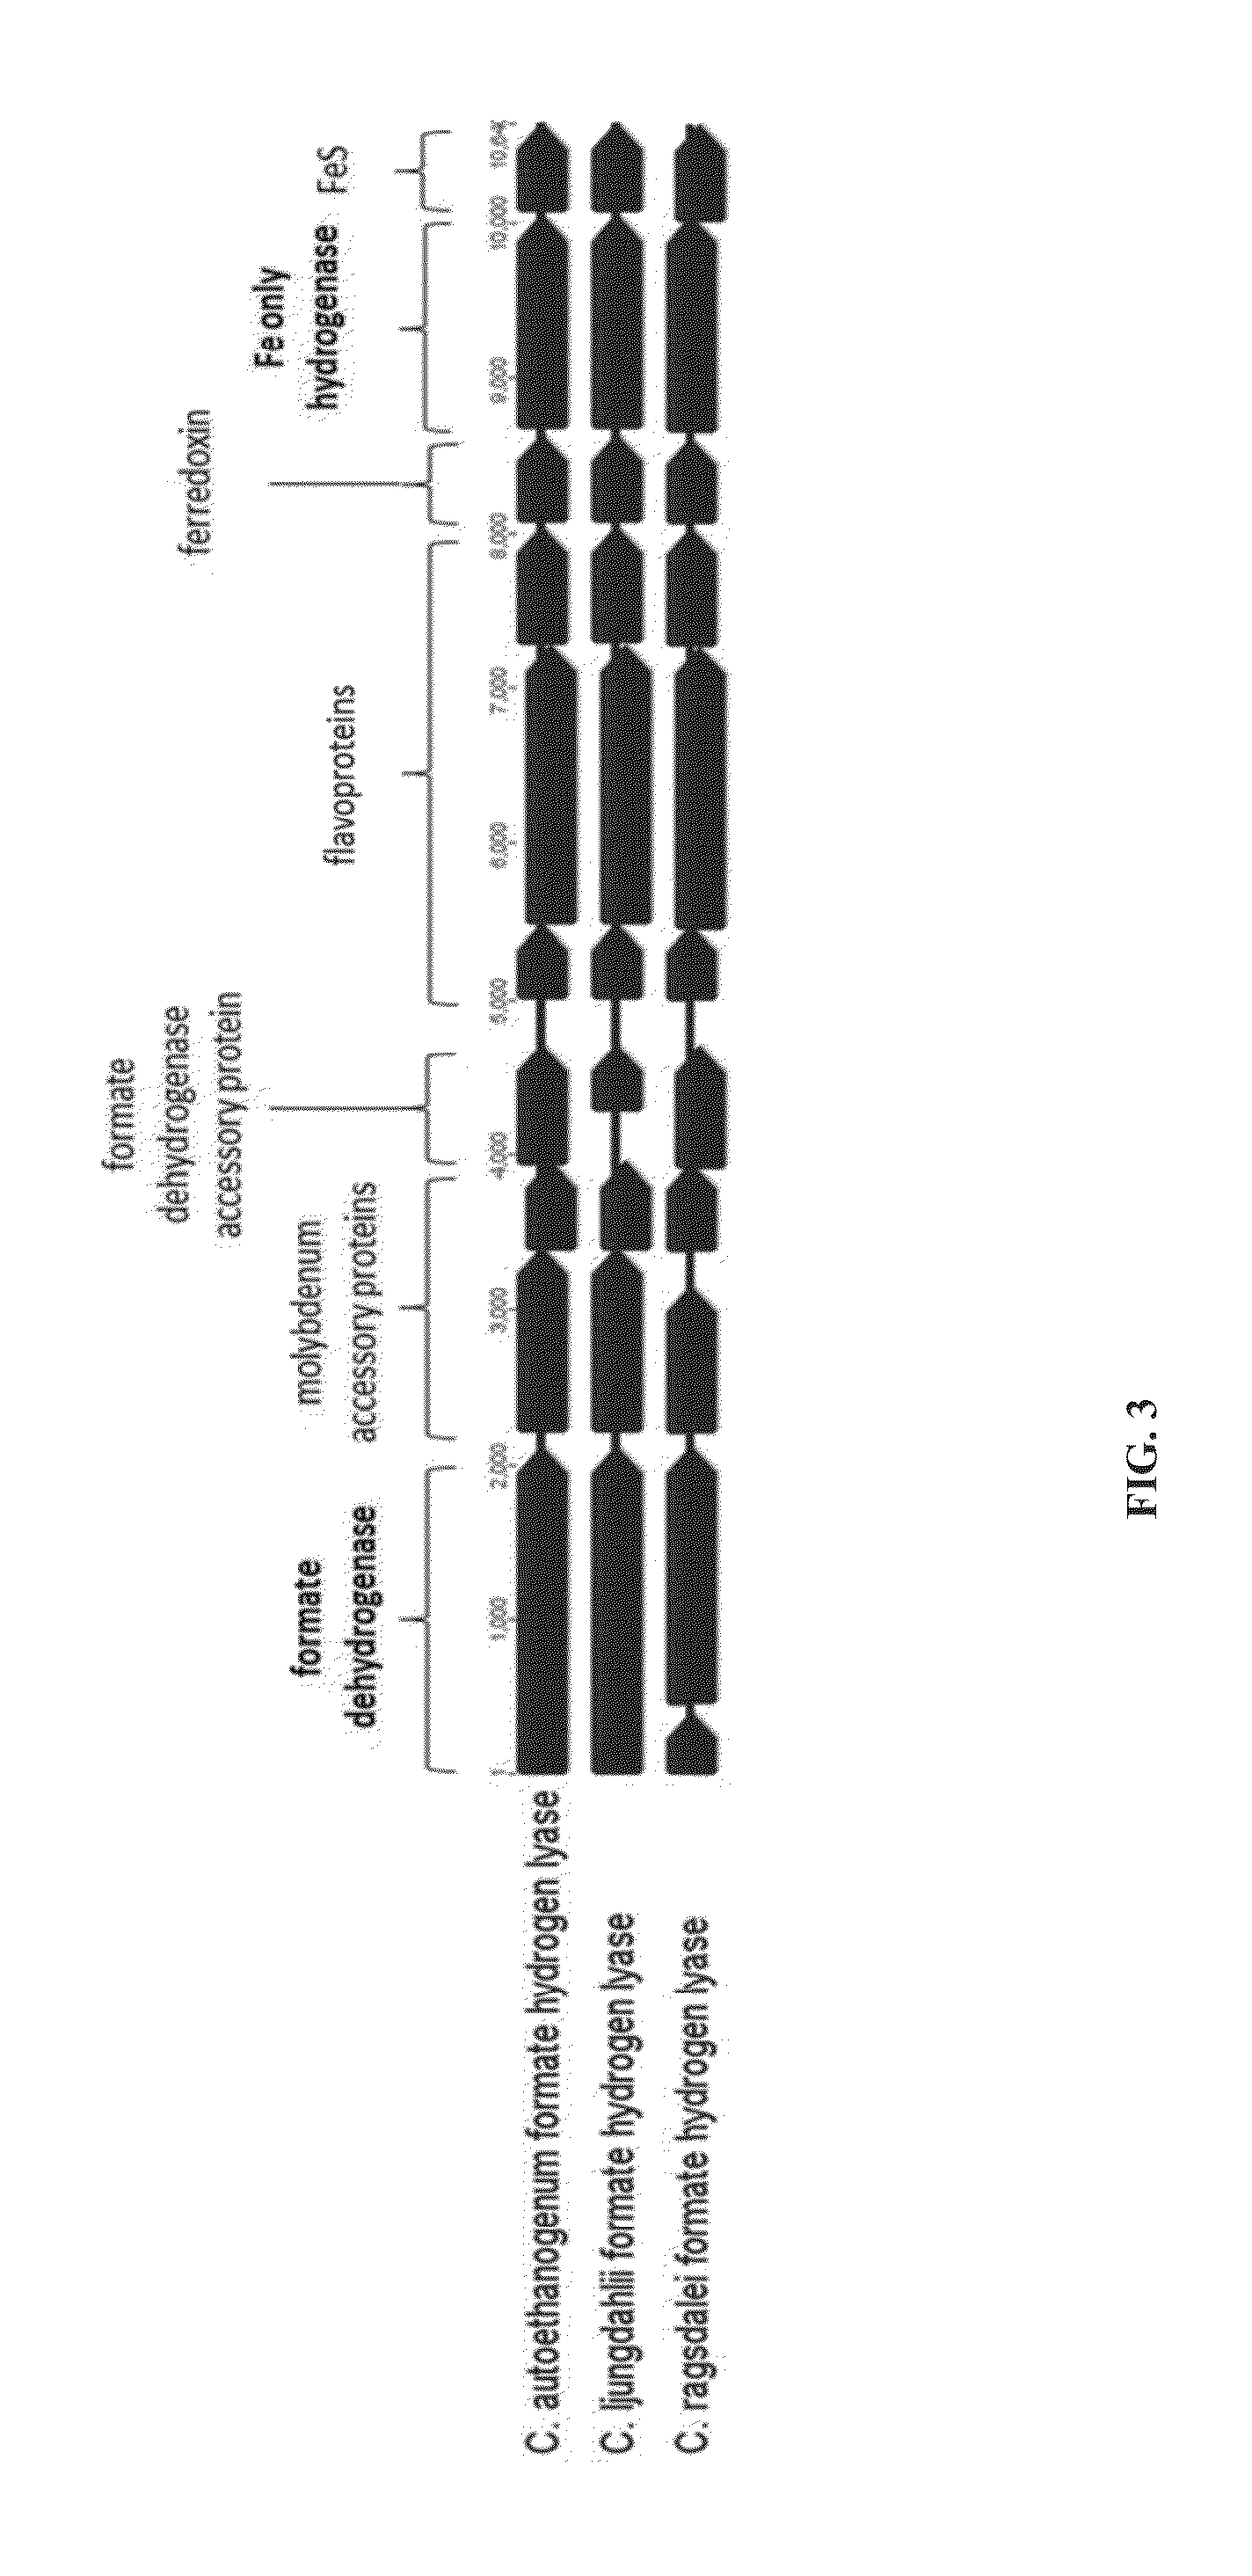 Recombinant microorganisms comprising NADPH dependent enzymes and methods of production therefor